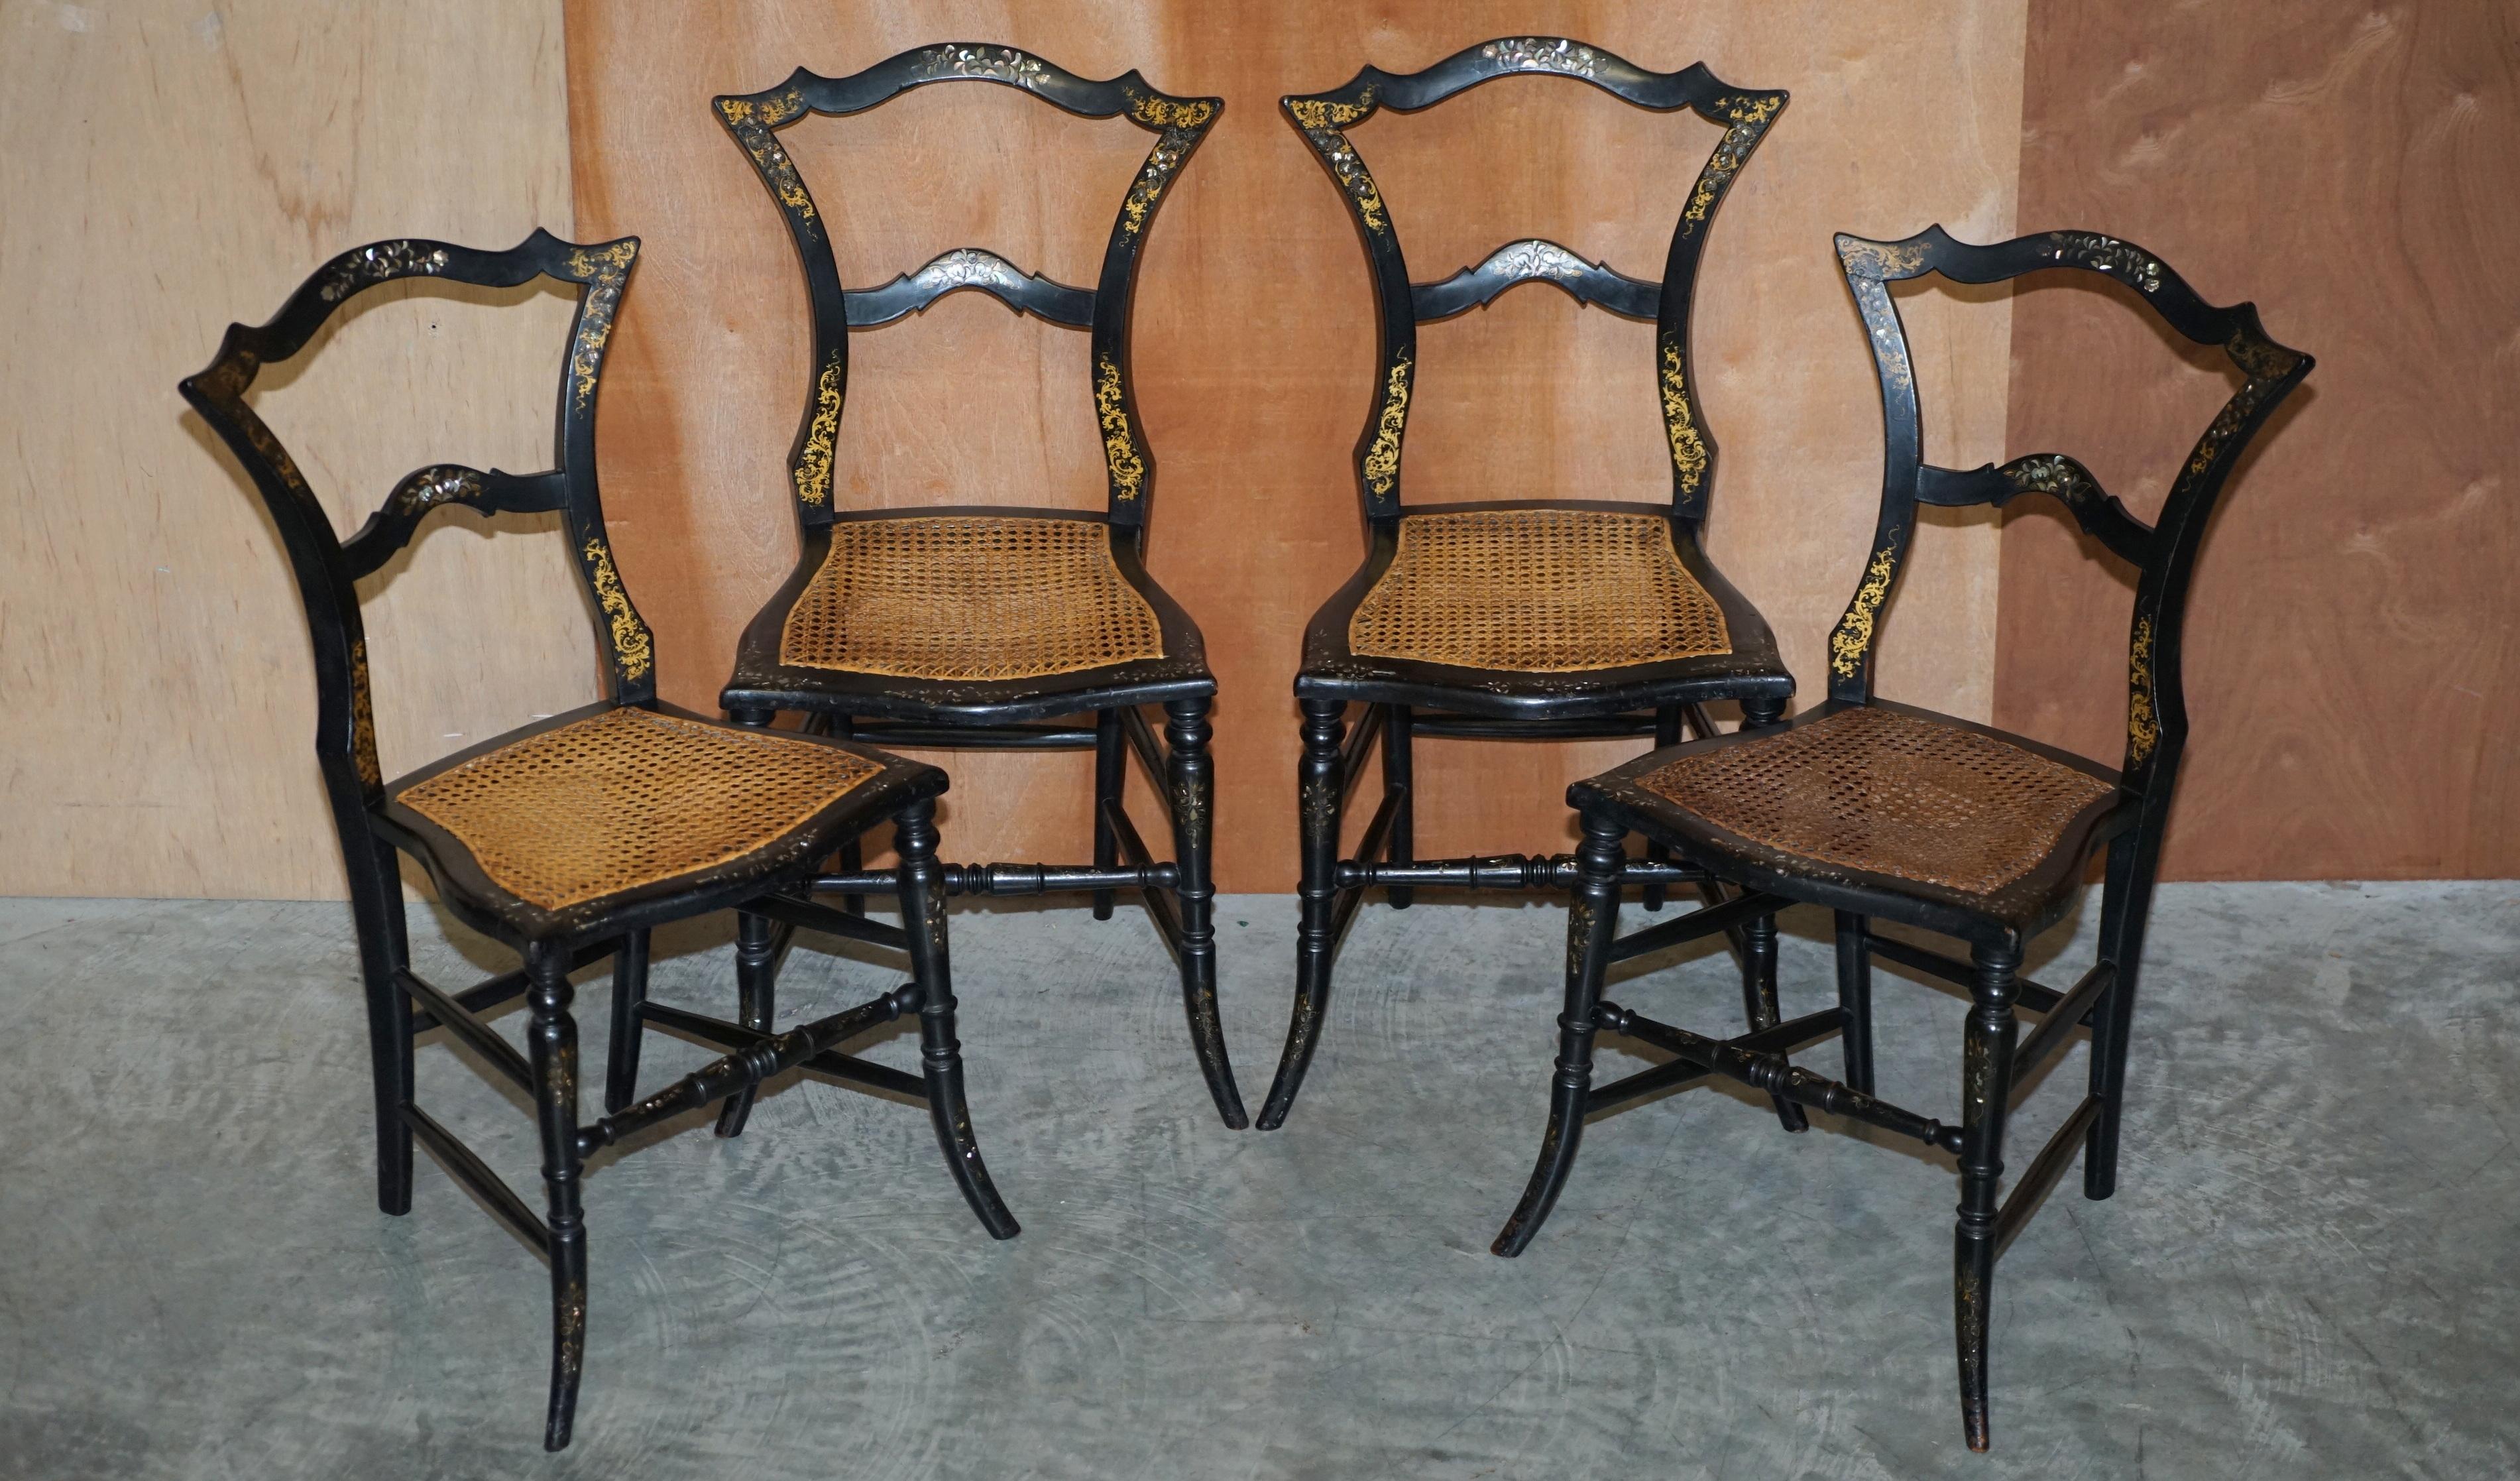 We are delighted to offer for sale this lovely suite of original circa 1810-1820 Regency bergere ebonised with mother of pearl inlay side chairs

A very good looking well made and decorative suite of chairs. In truth, I have never seen a suite of